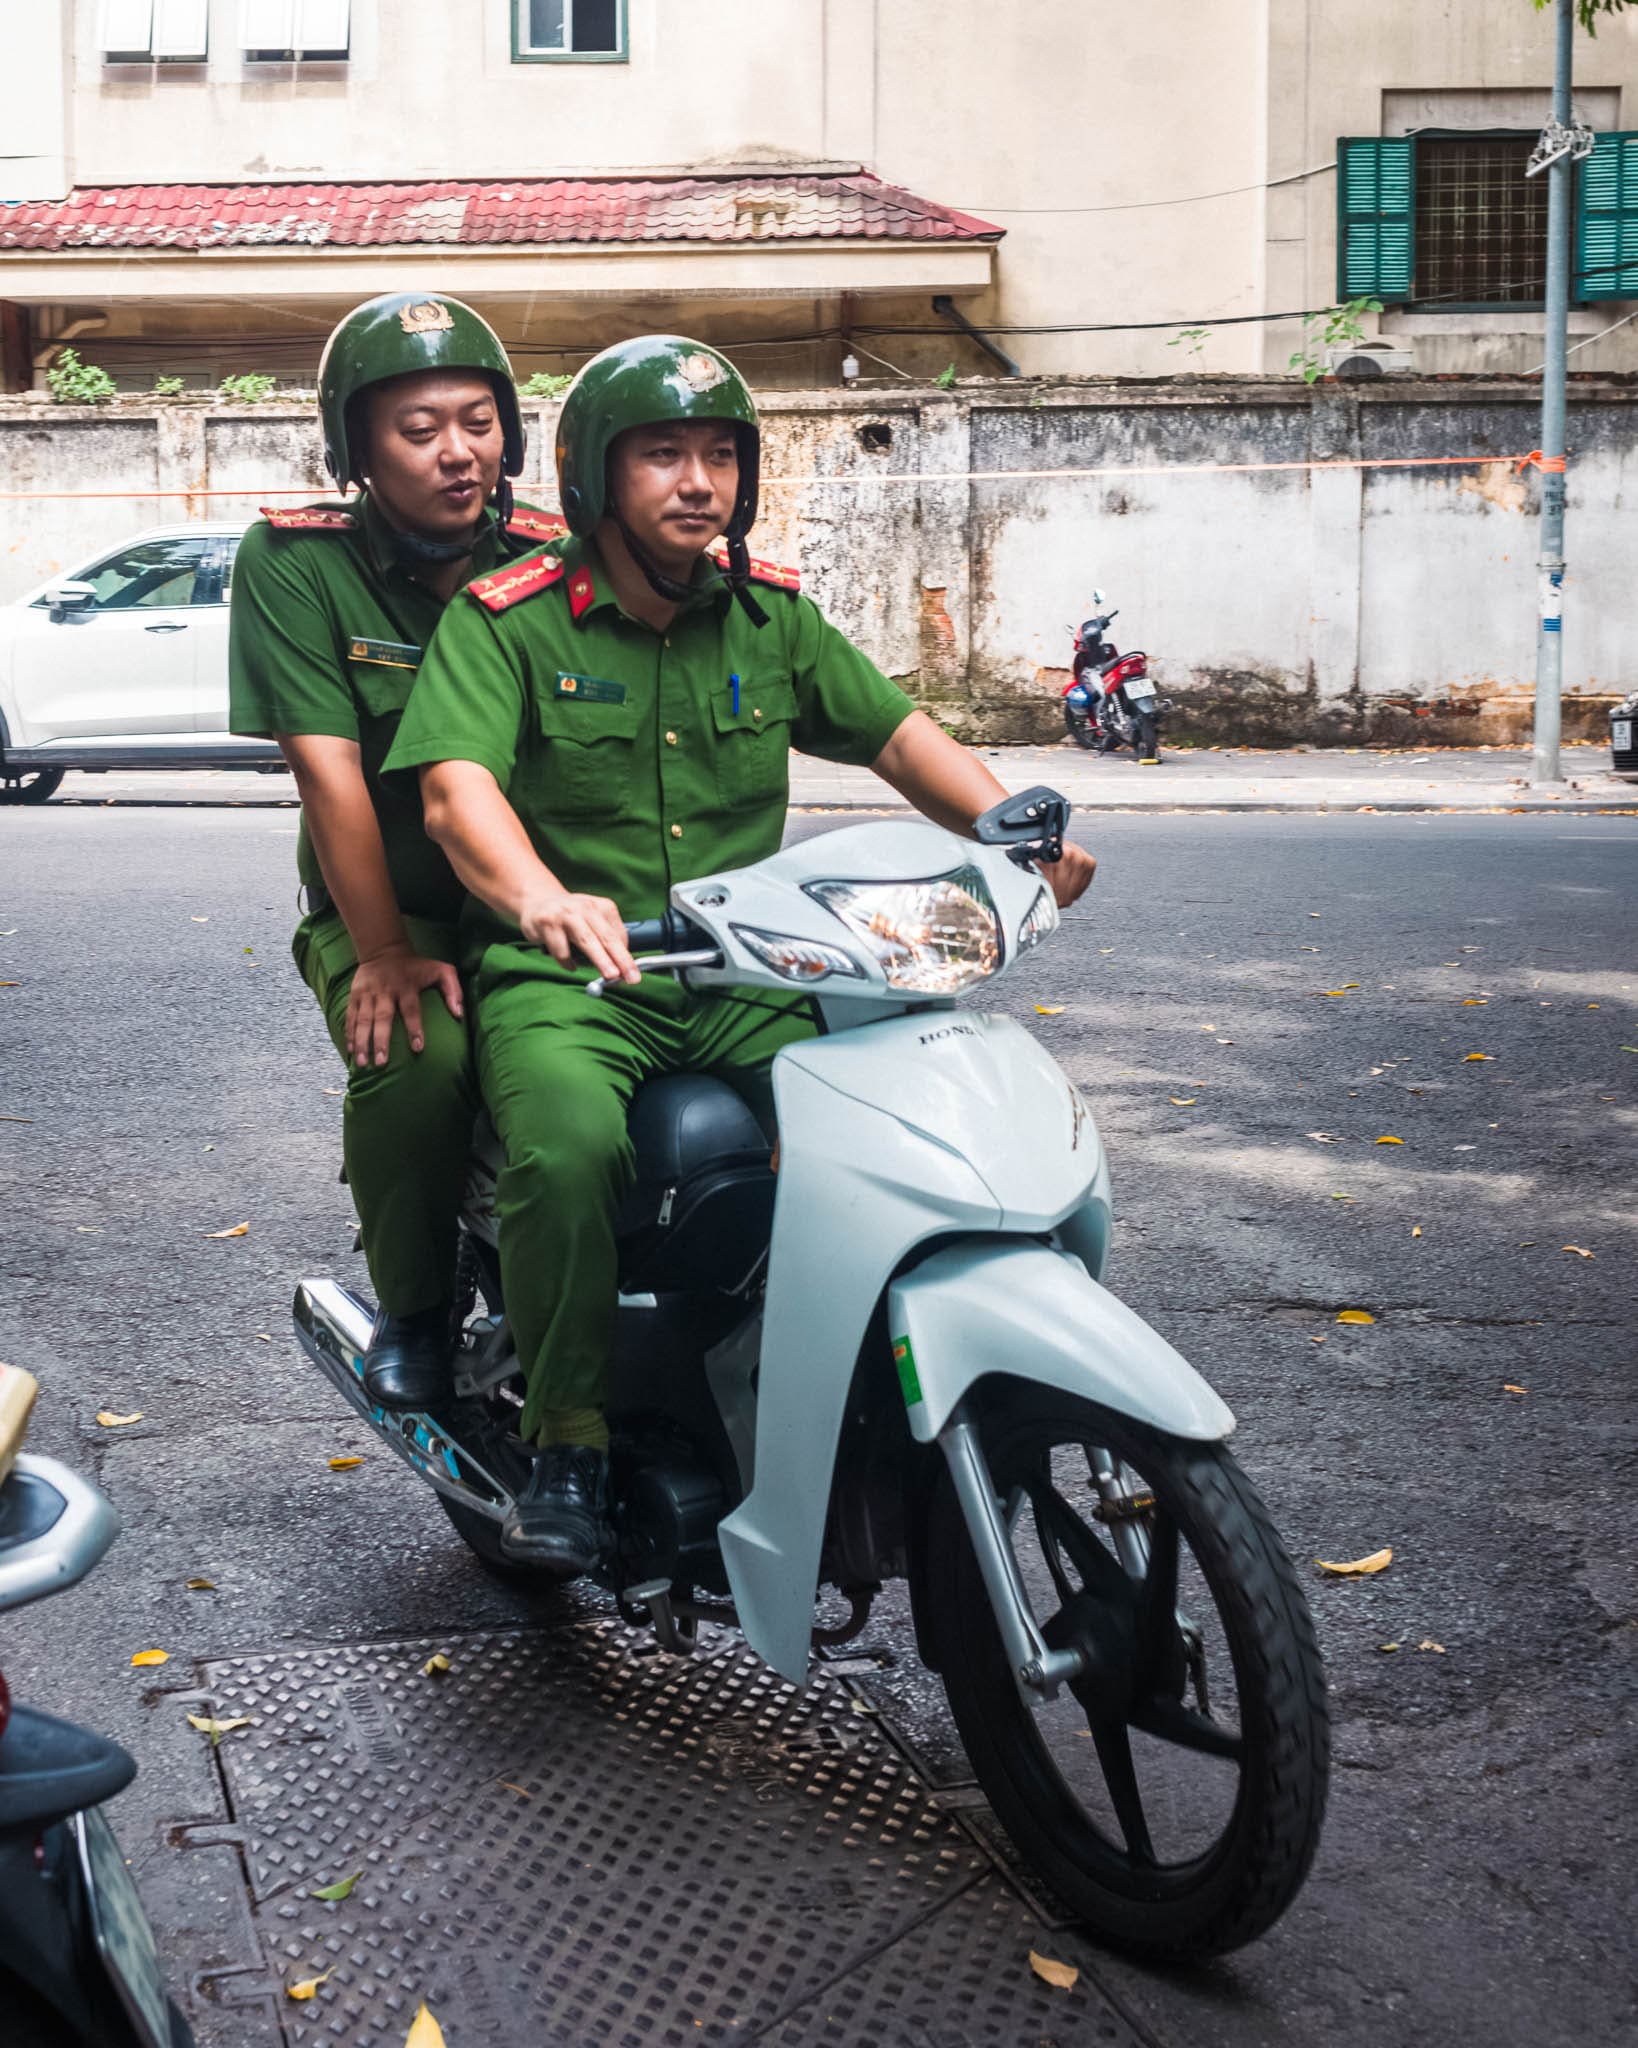 Uniformed individuals riding a modern scooter in an aged urban setting.